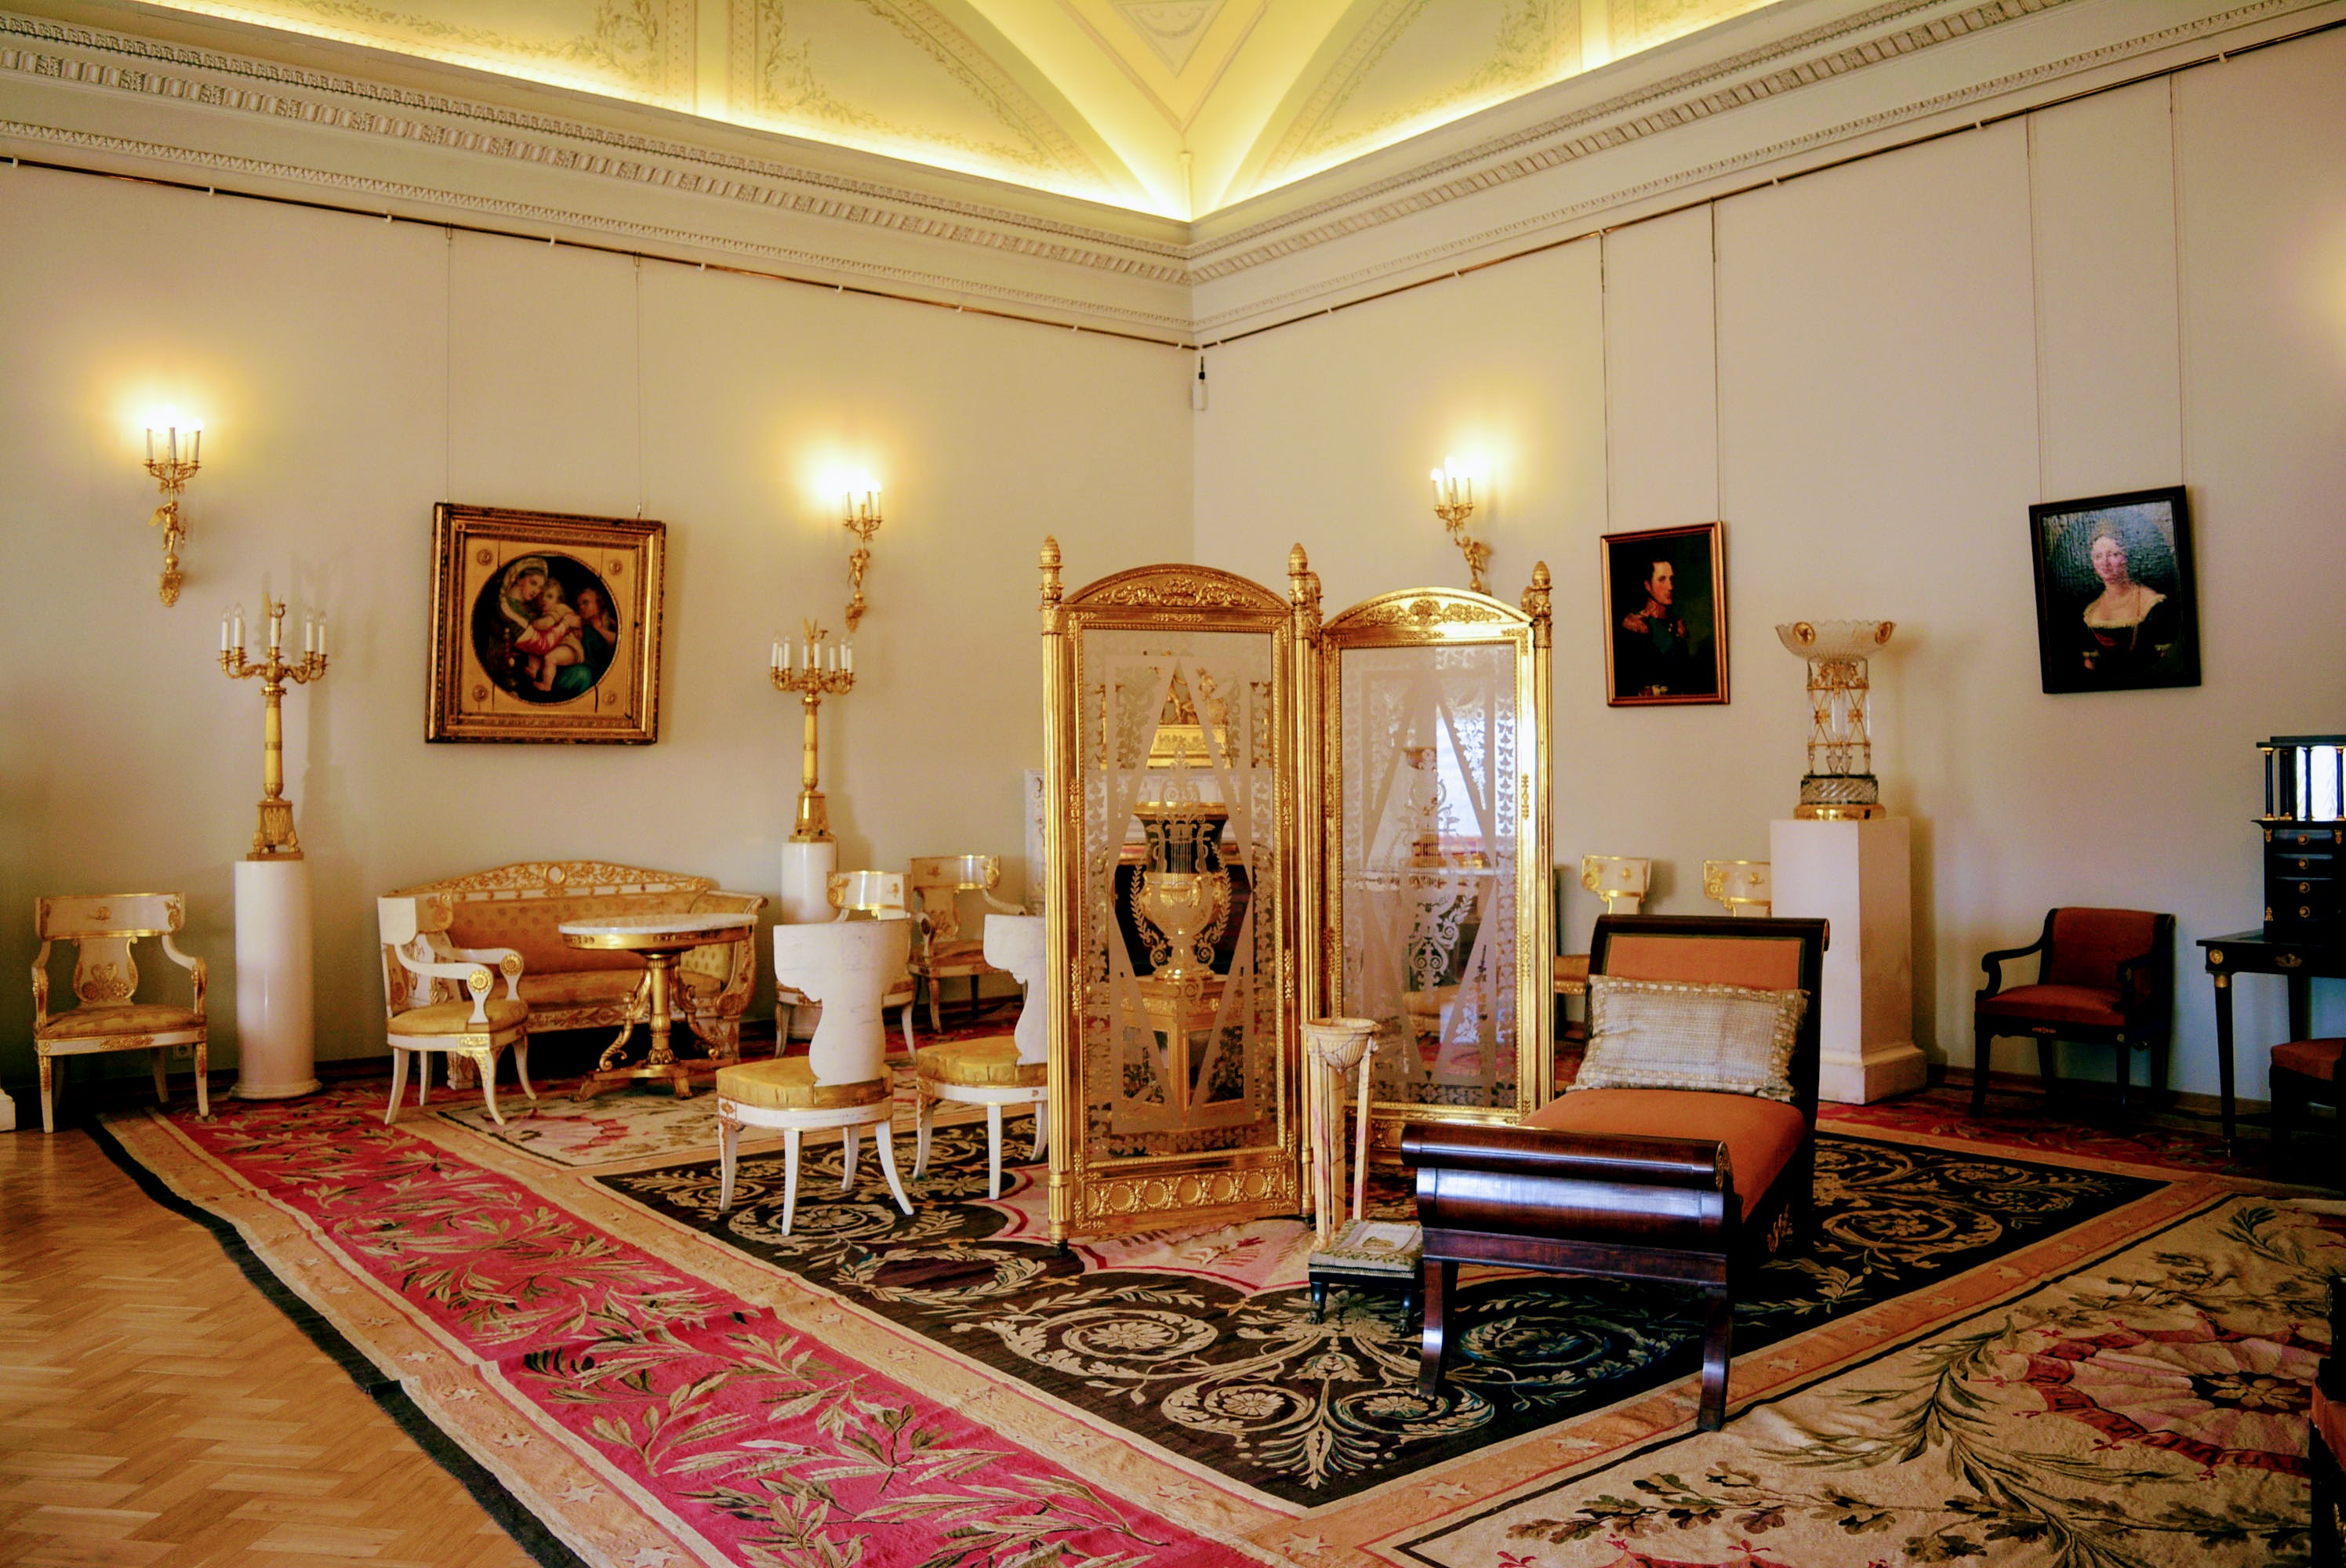 Displays at the Winter Palace, Hermitage